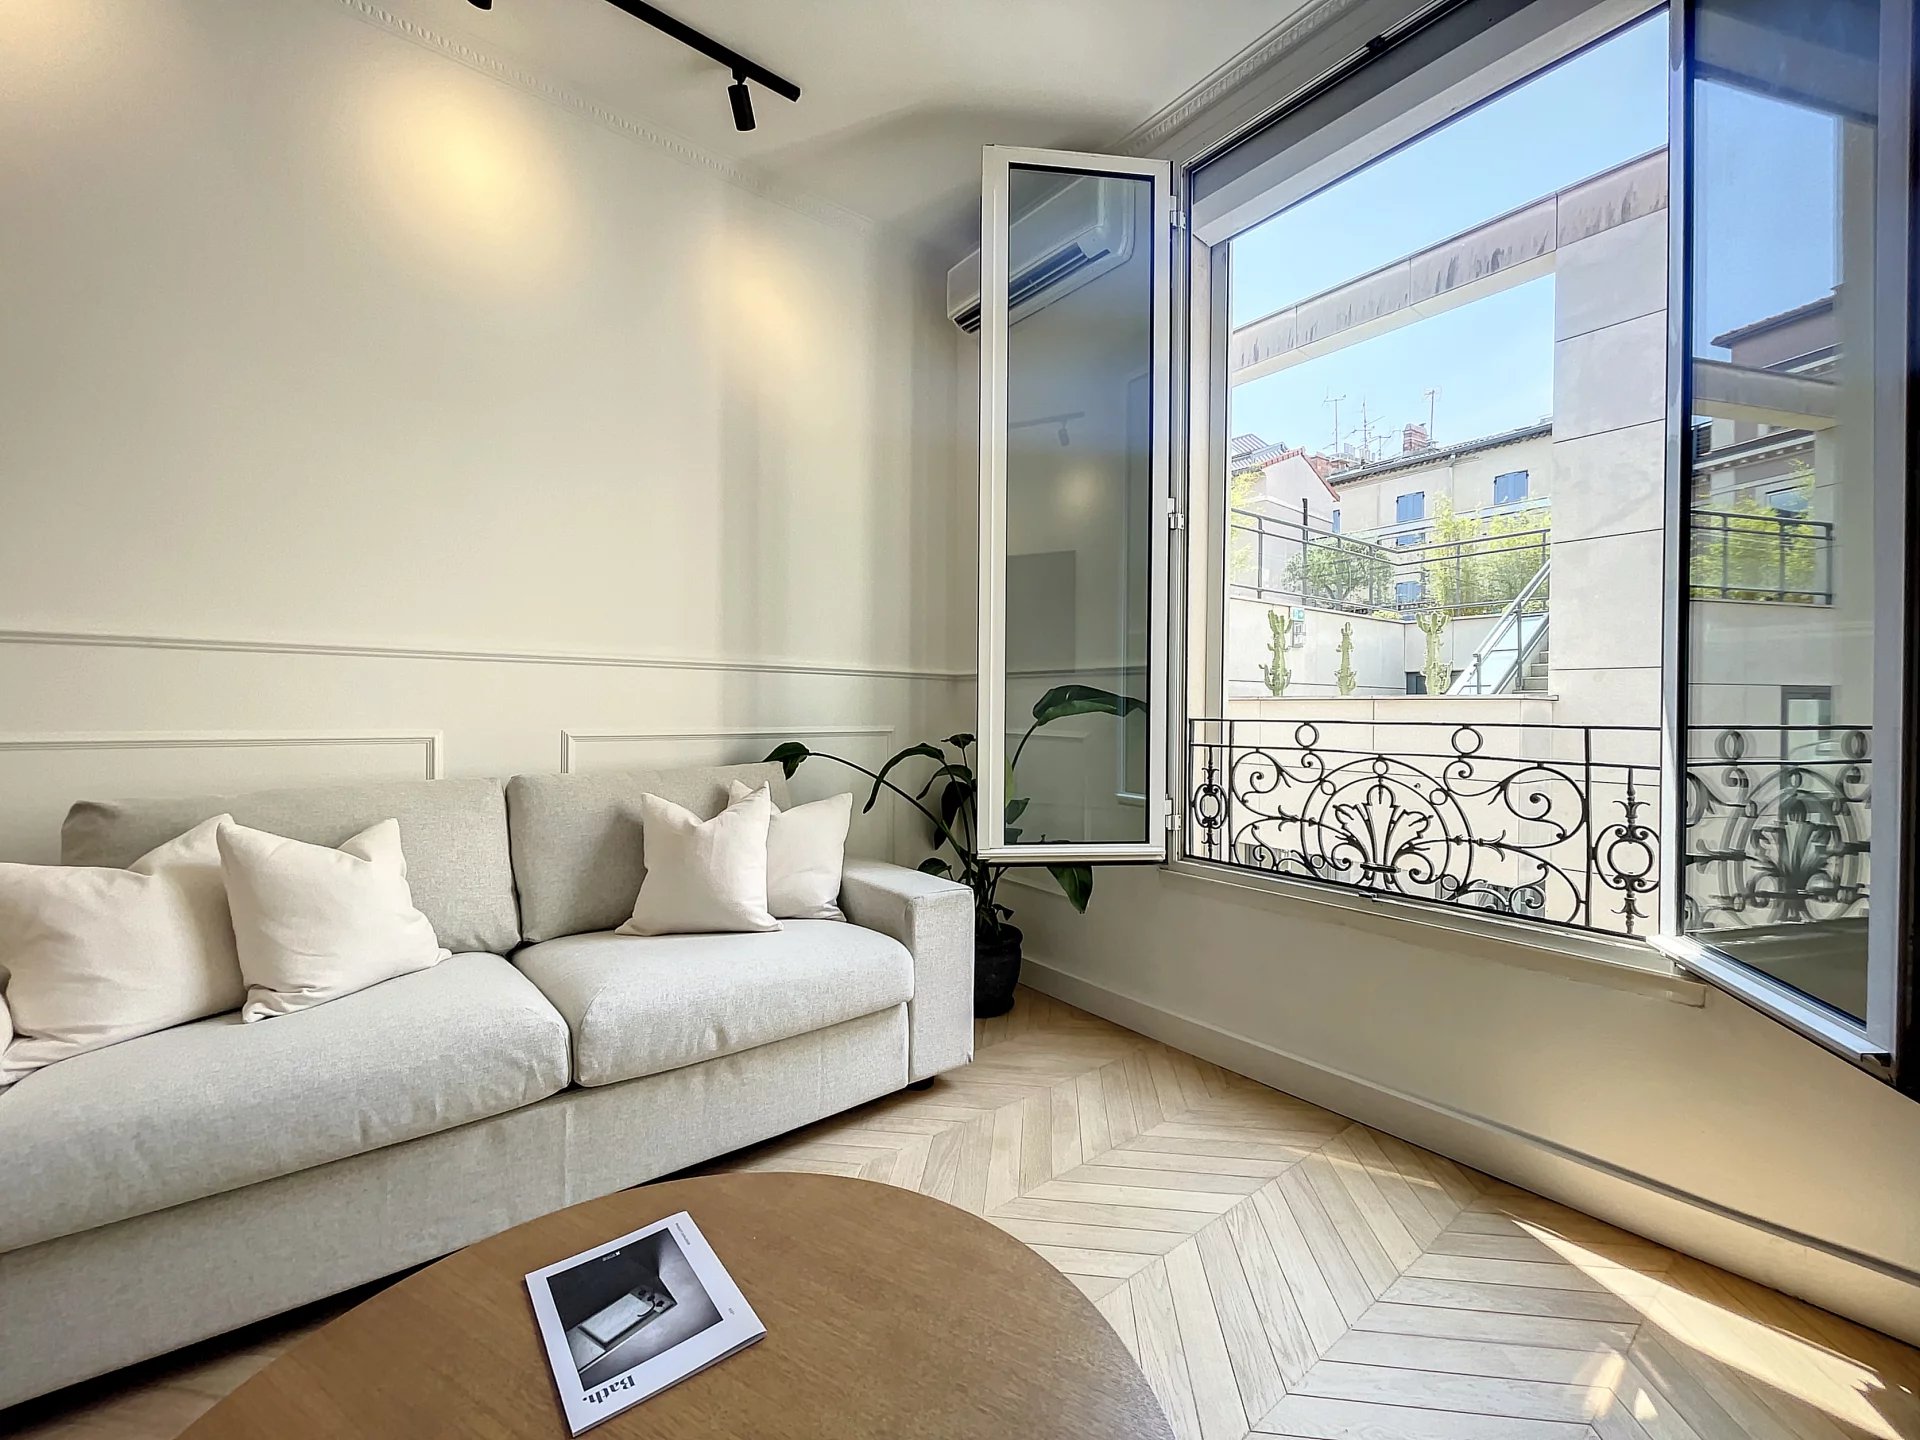 Cannes - Banane: Entirely renovated duplex